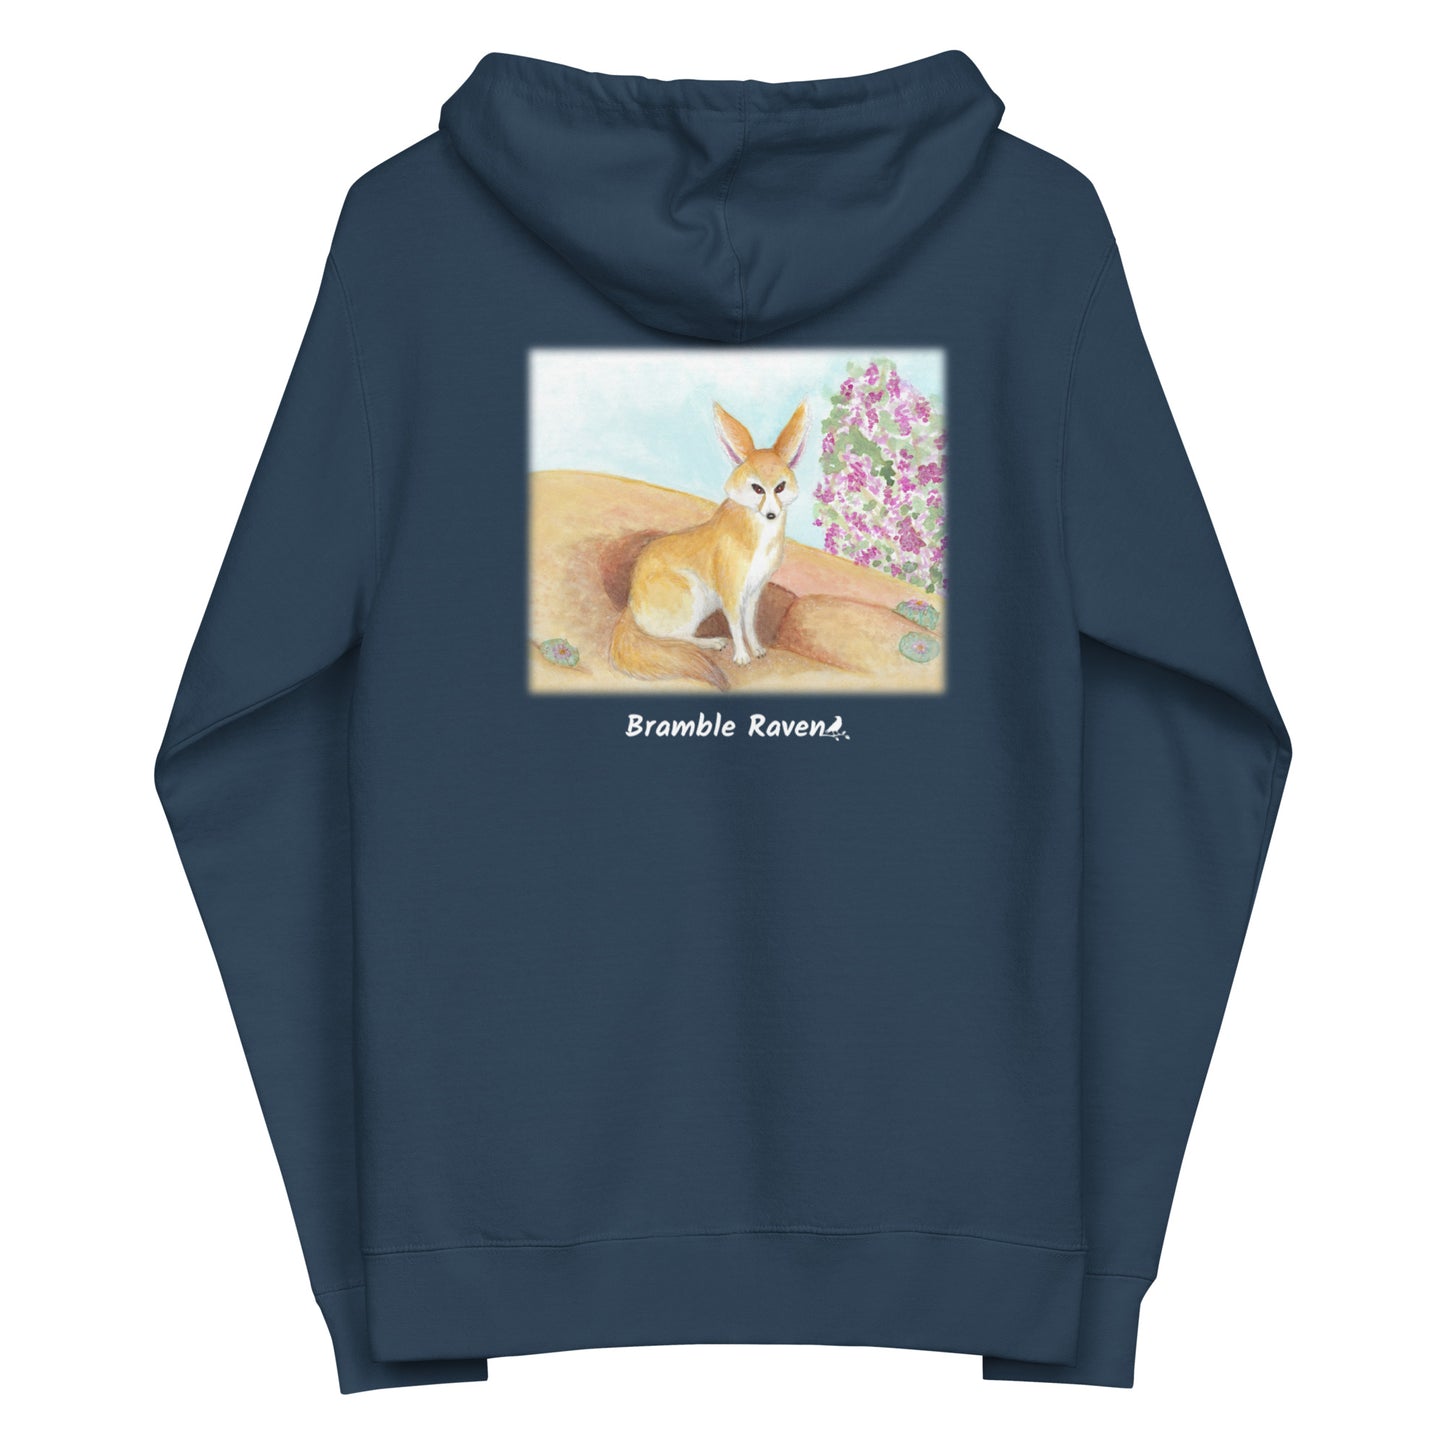 Unisex fleece-lined zip-up navy blue colored hoodie. Features original watercolor painting of a fennec fox in the desert on the back of the hoodie.